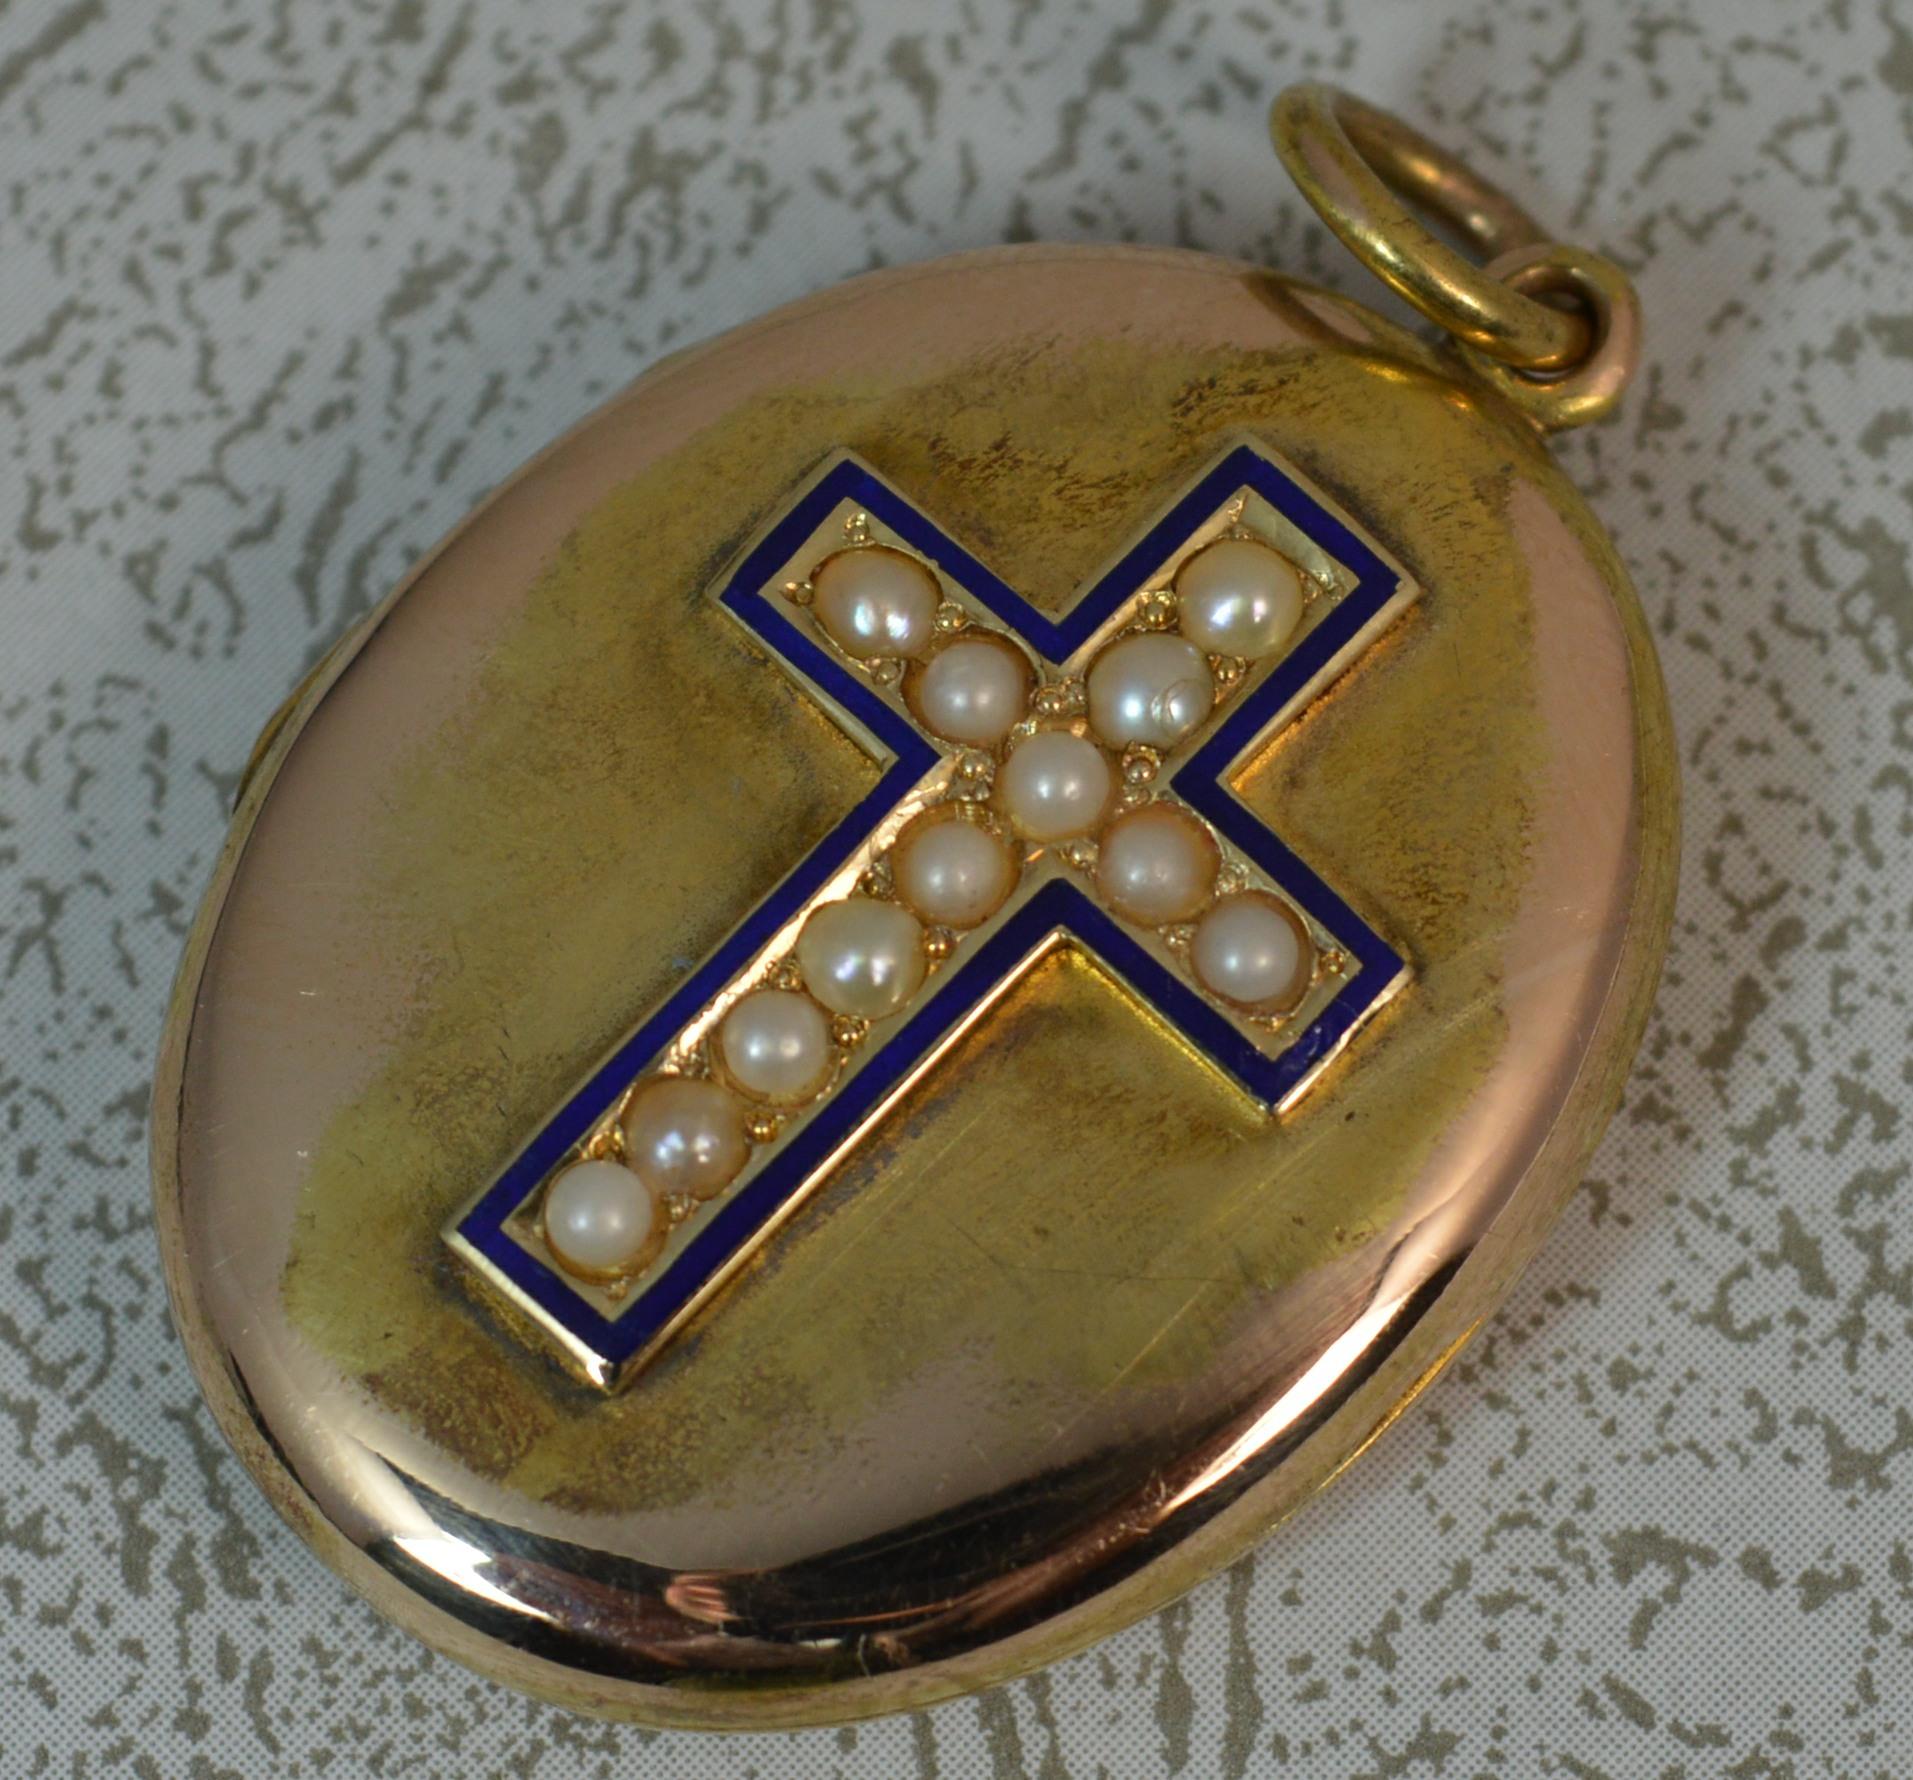 A true Victorian period pendant locket c1880.
Solid 15 carat gold throughout.
Designed to the front with a cross set with seed pearls, surrounded by blue enamelling. The surround and reverse is all plain.

CONDITION ; Good for age. Crisp design and